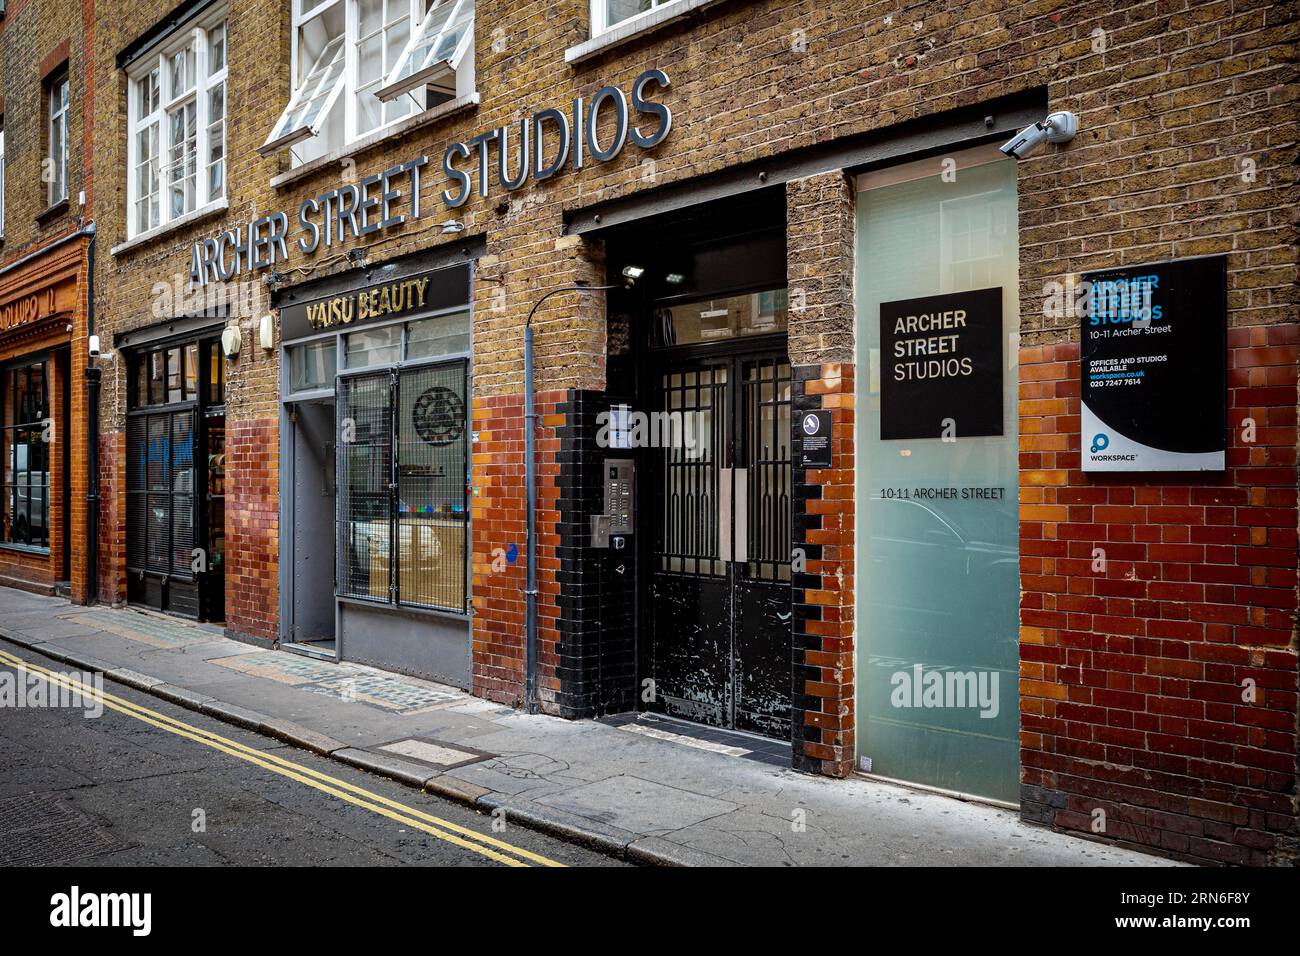 Archer Street Studios Soho London. Workspace shared office space in the heart of London West End. Workspace is a flexible space provider founded 1987. Stock Photo